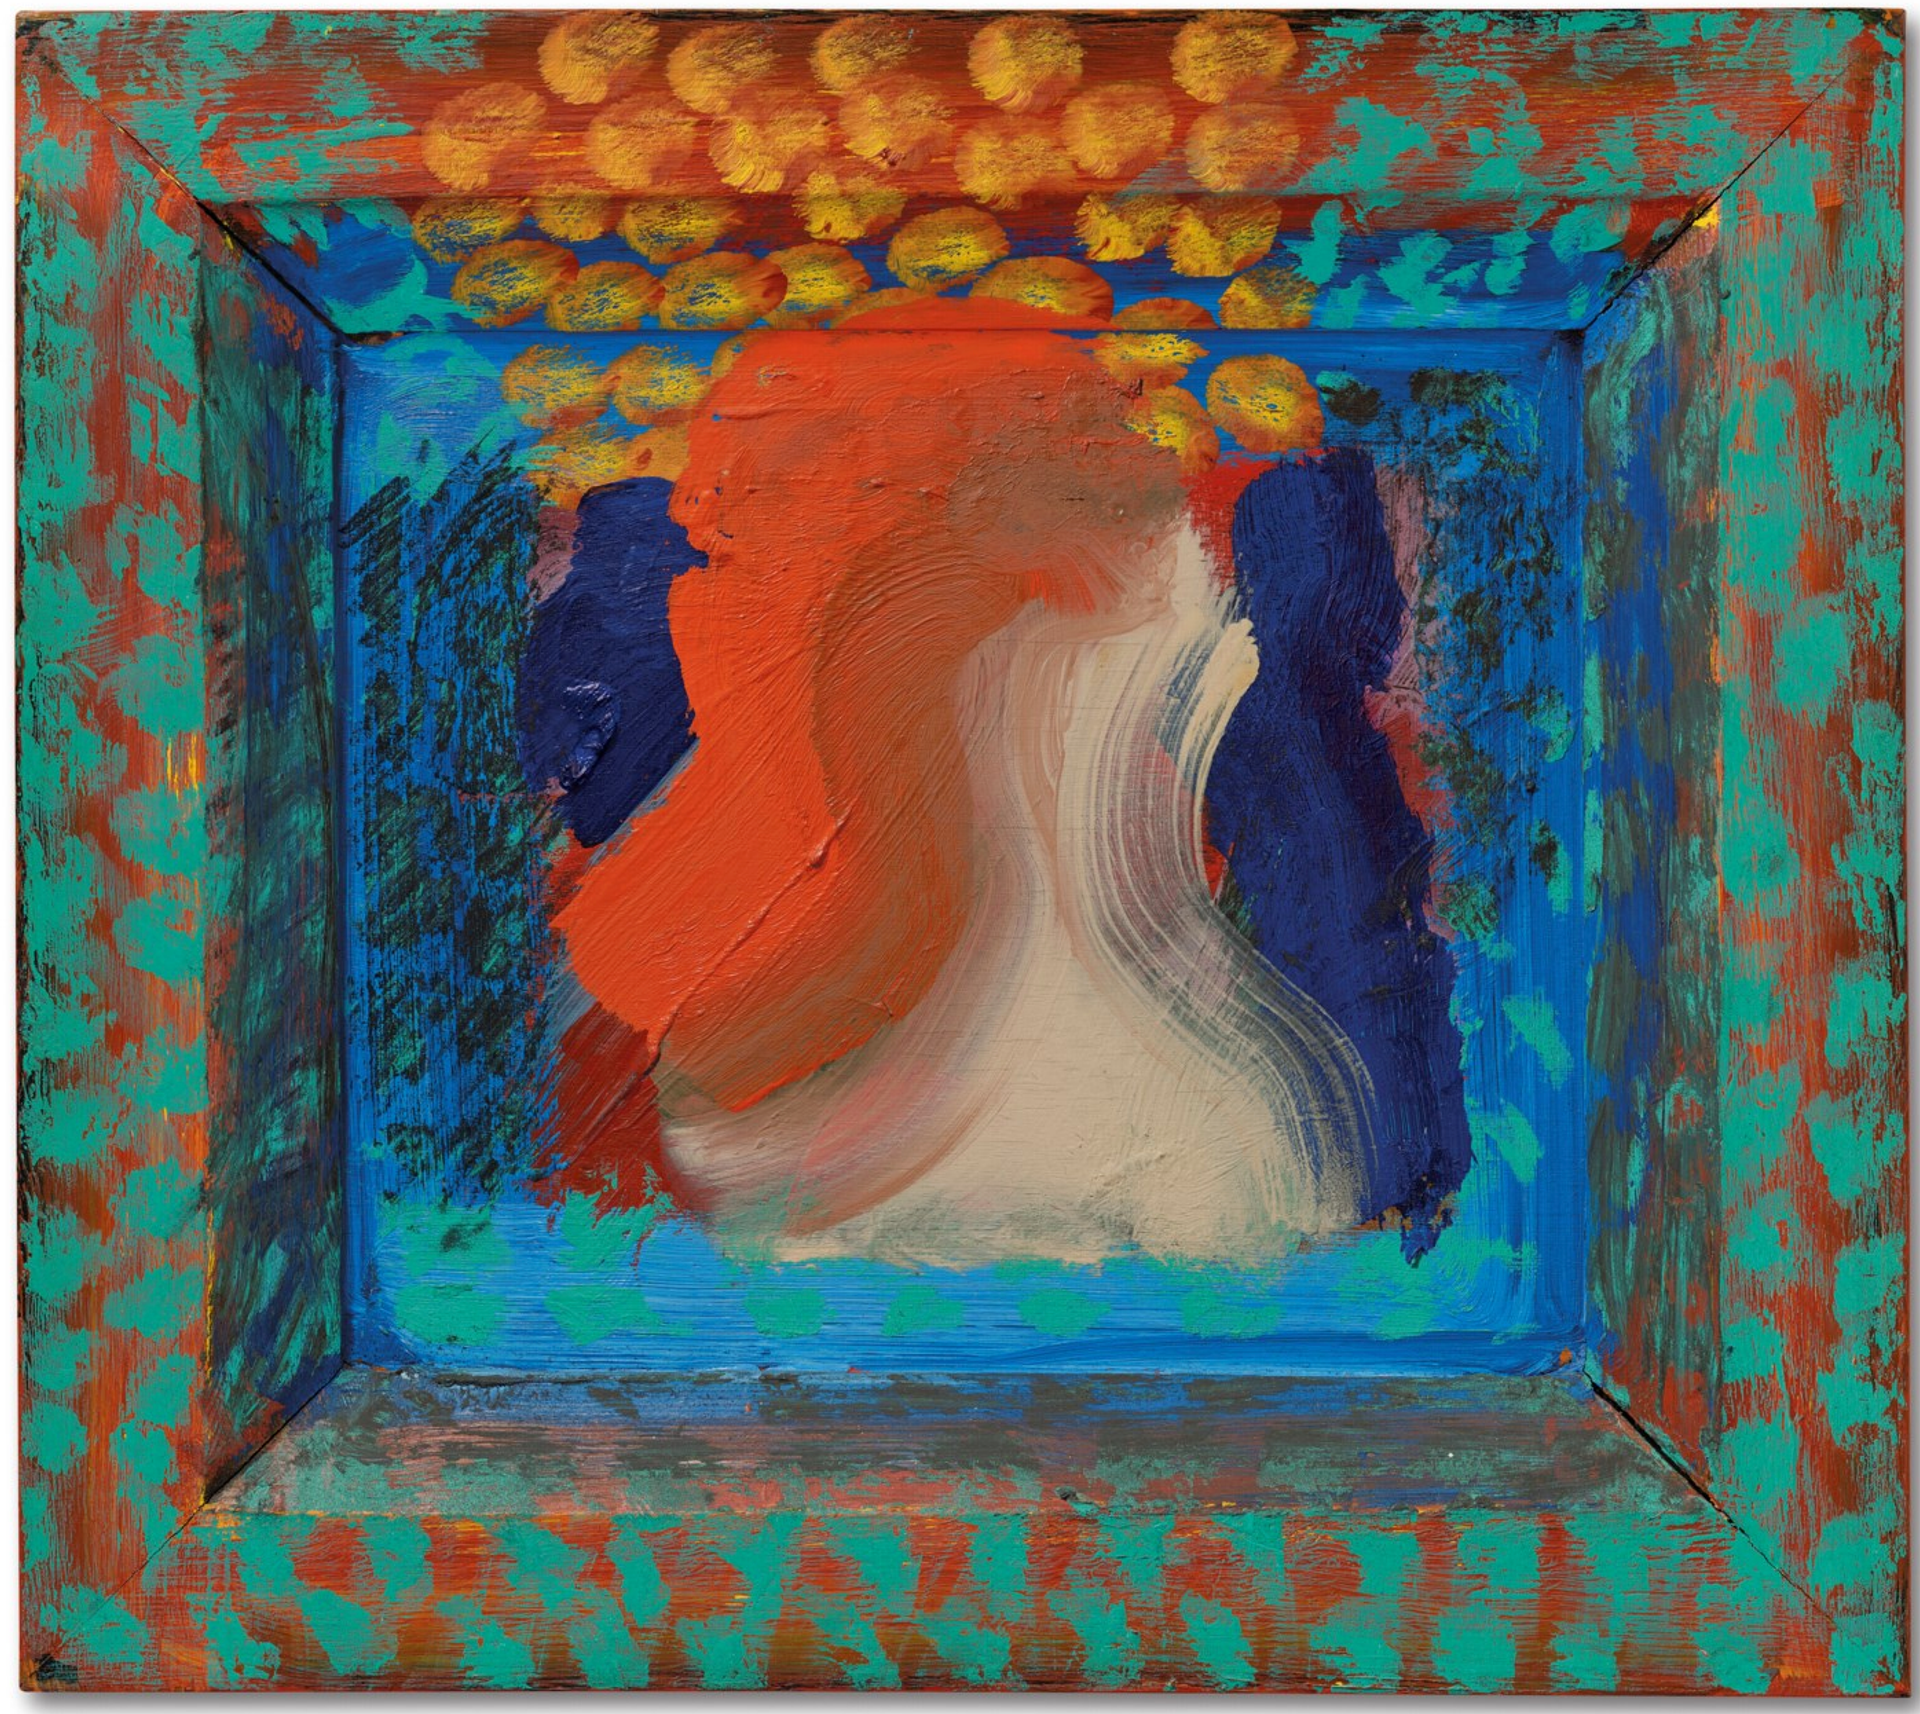 An oil on wood work by Howard Hodgkin depicting a myriad of blue, green, red, white, and yellow daubs and strokes of paint.